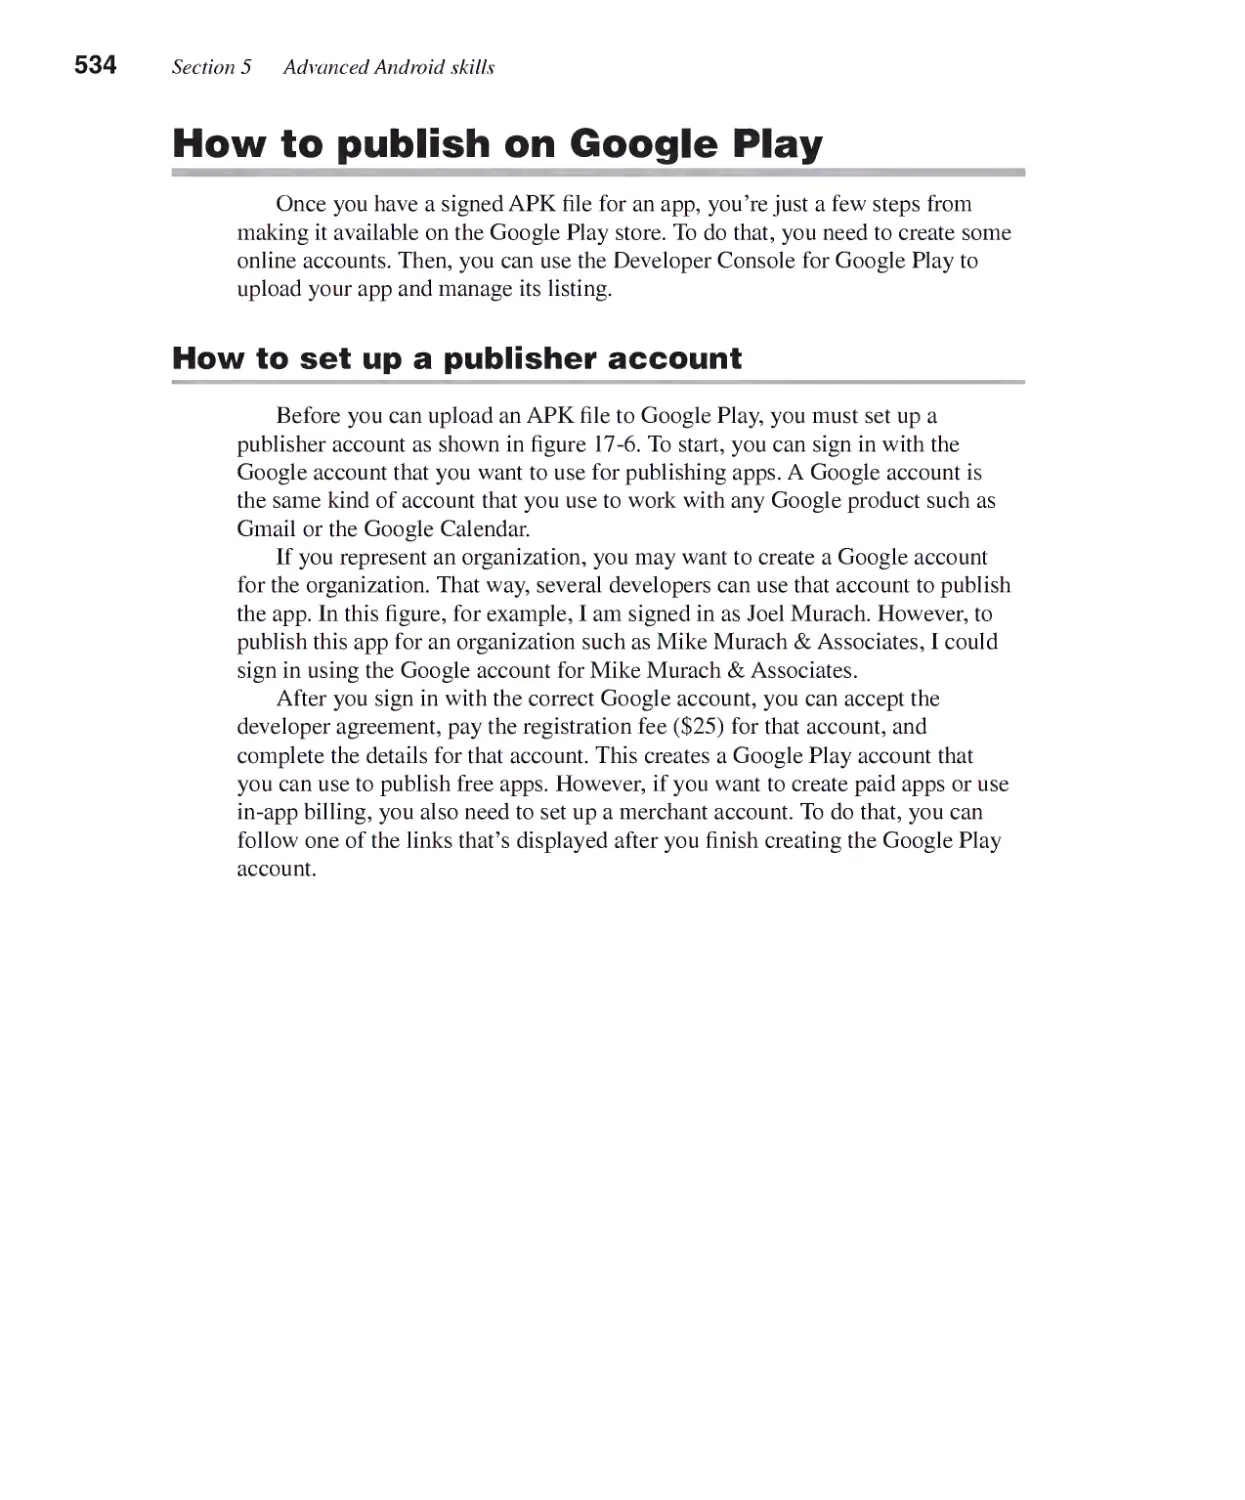 How to Publish on Google Play